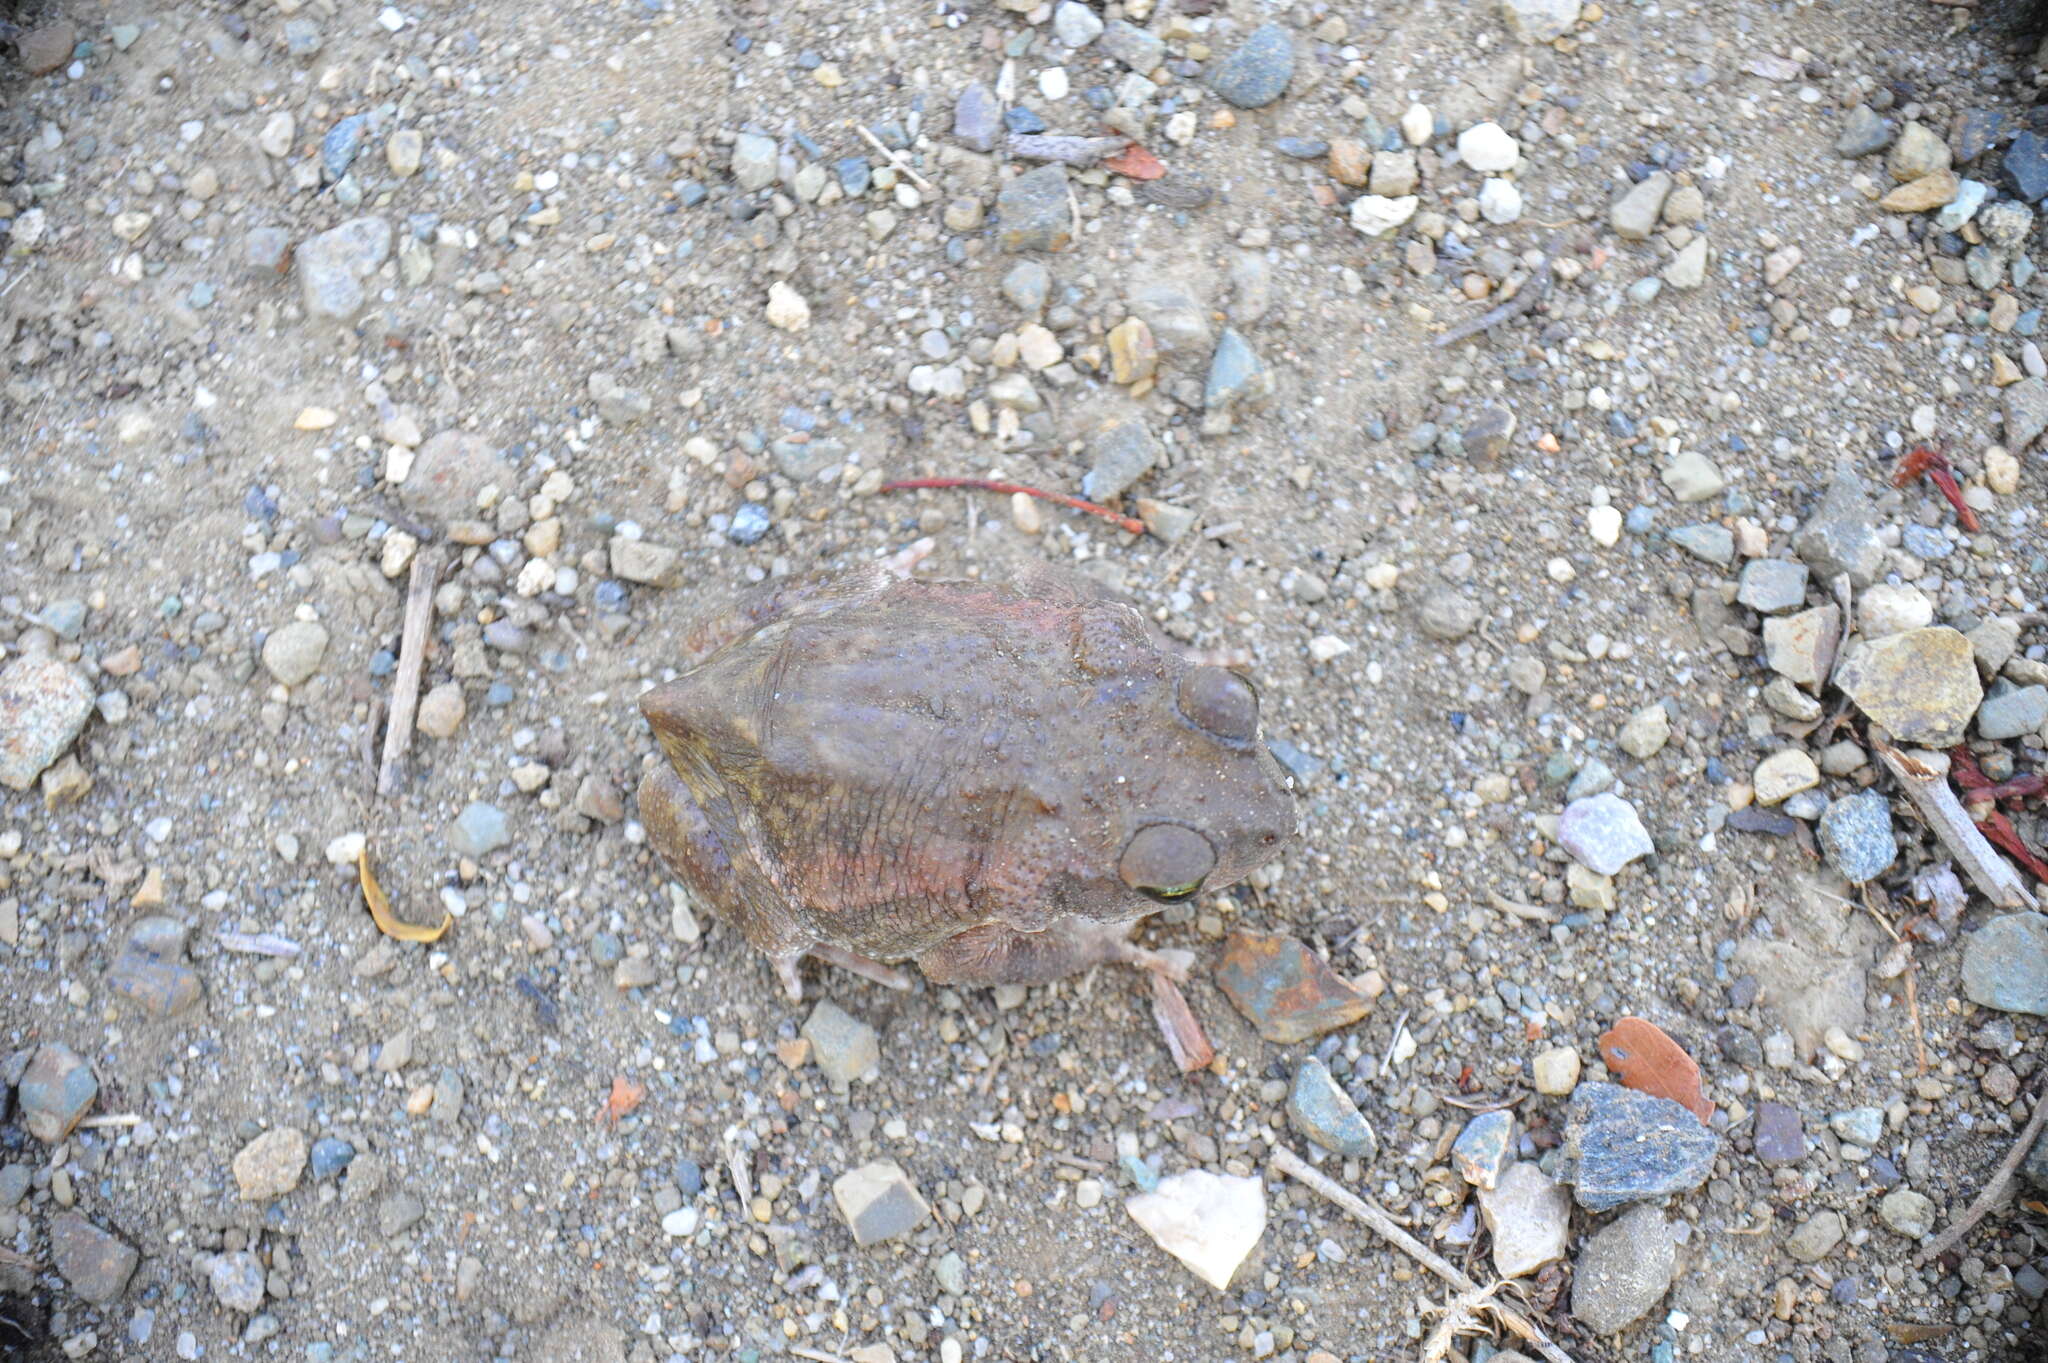 Image of Cuban small-eared toad